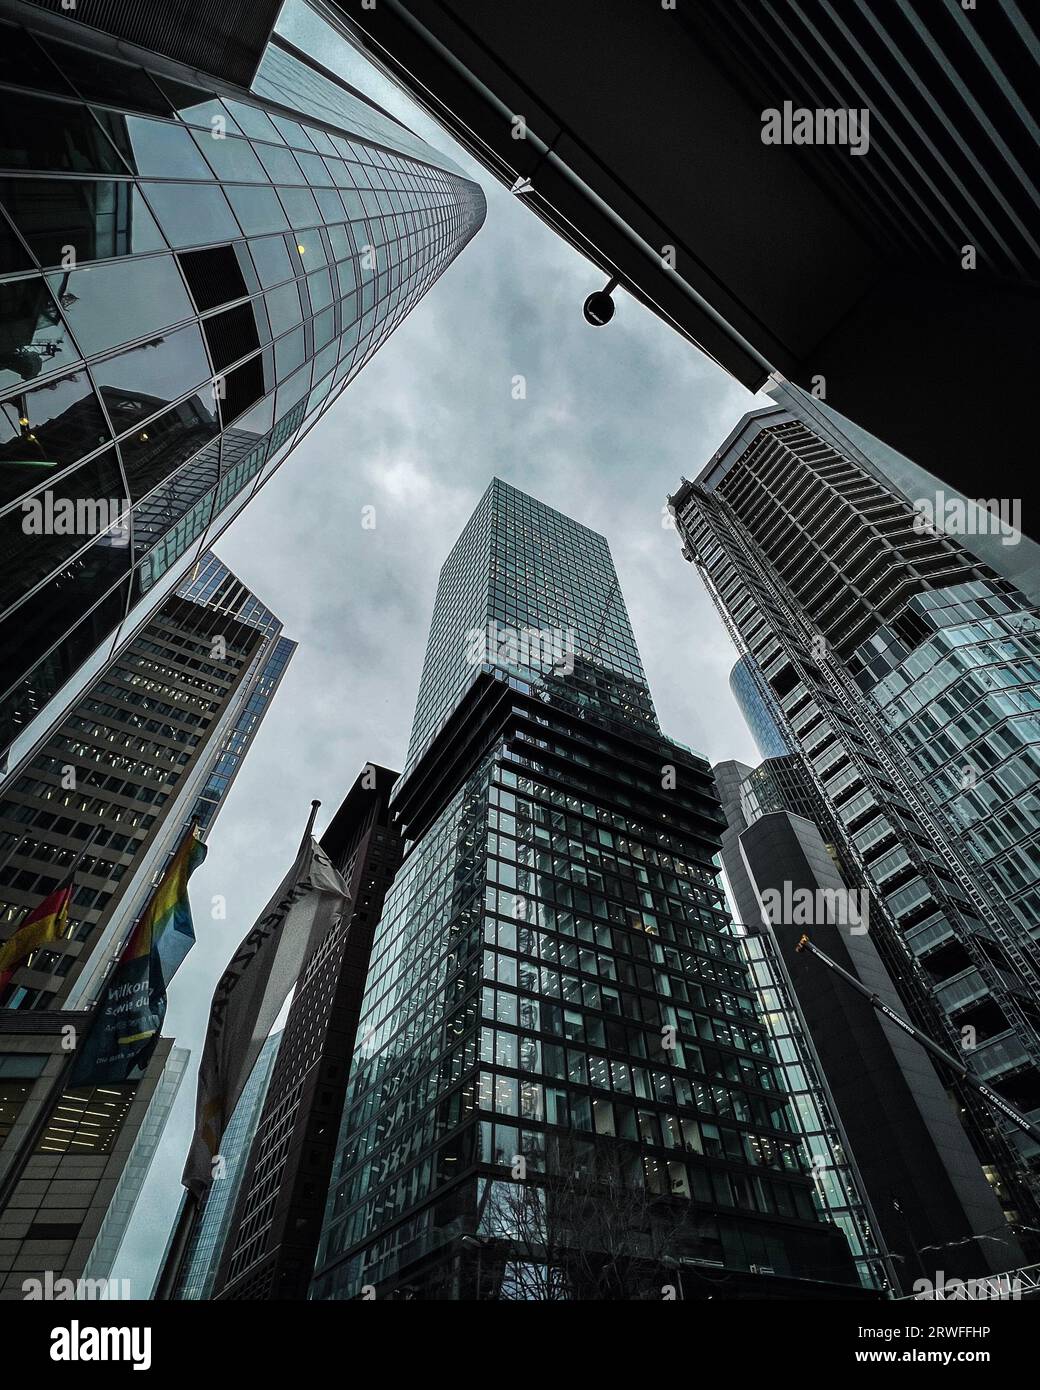 Crazy Perspective on the Skyscrapers of Frankfurt Stock Photo